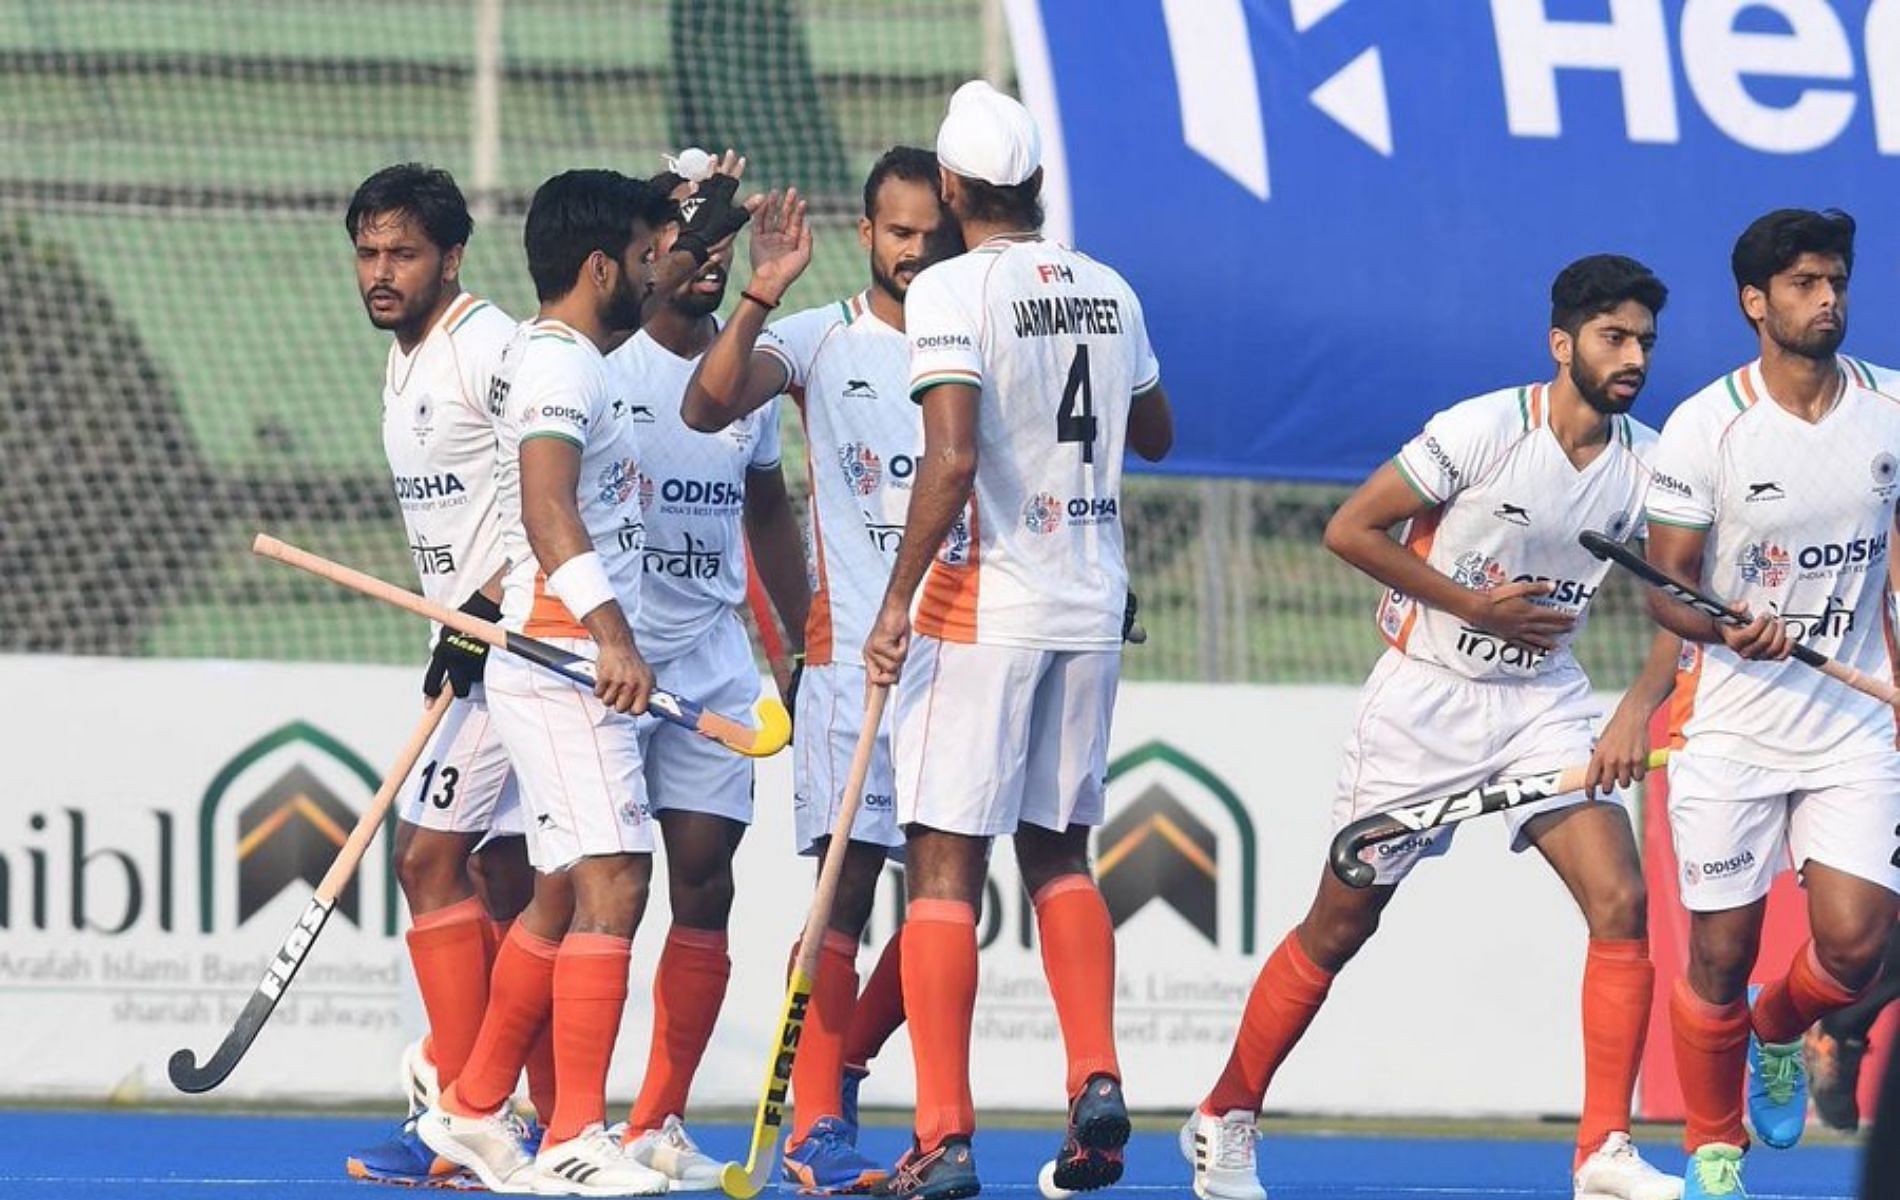 India beat Pakistan 4-3 to win bronze in the Asian Champions Trophy.